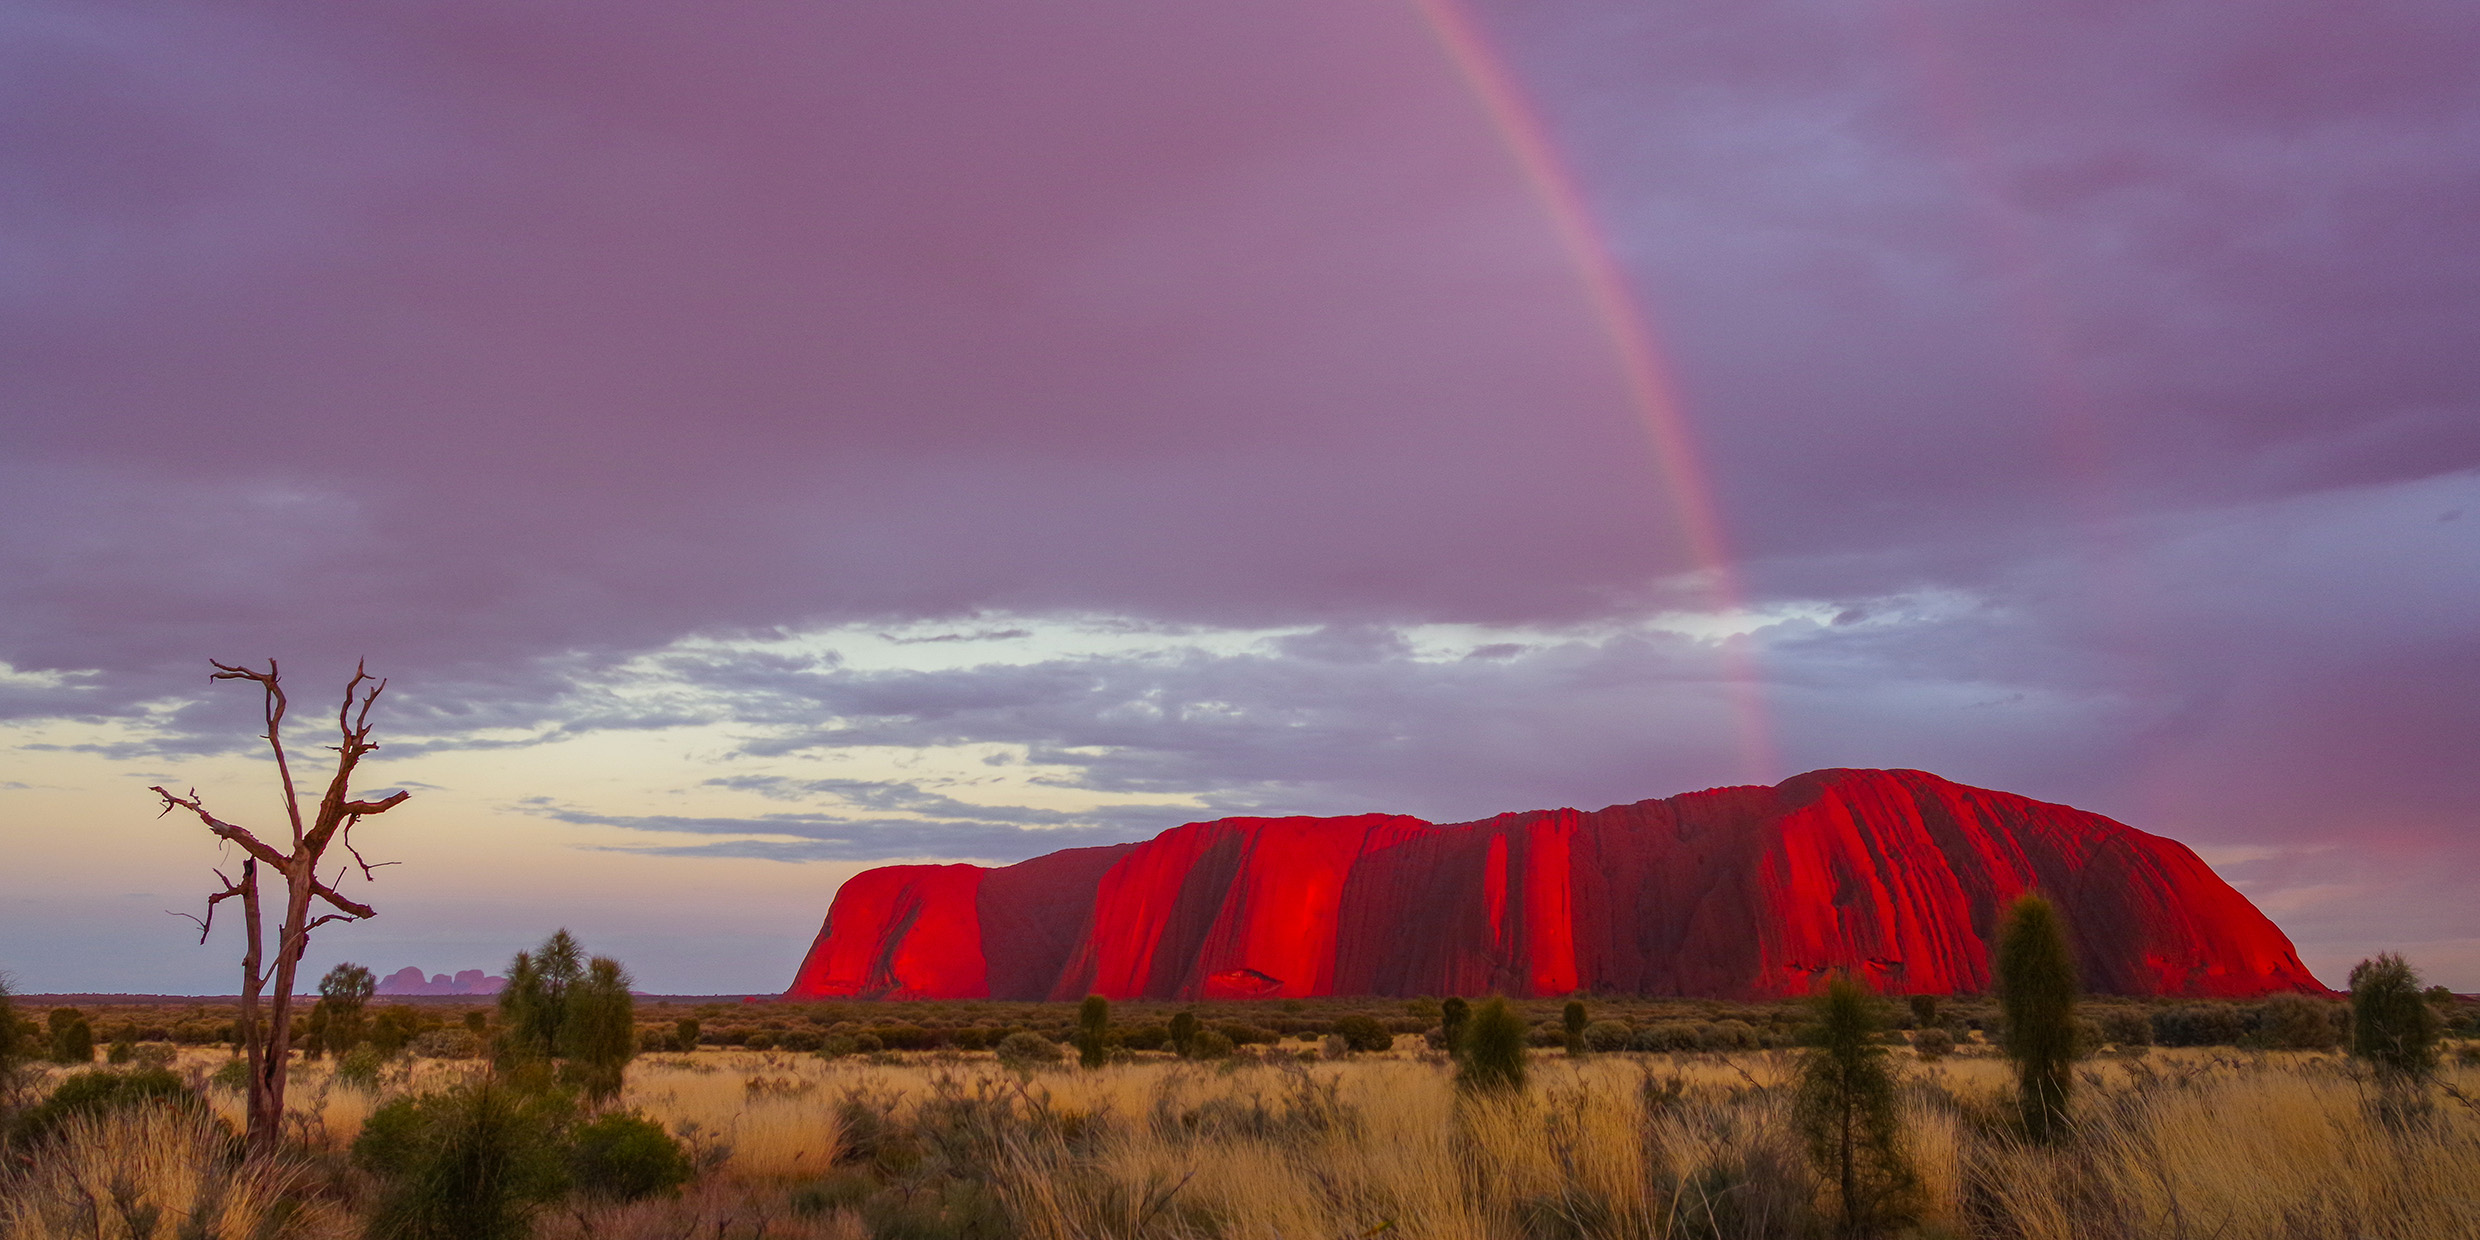 Image of Ayers Rock